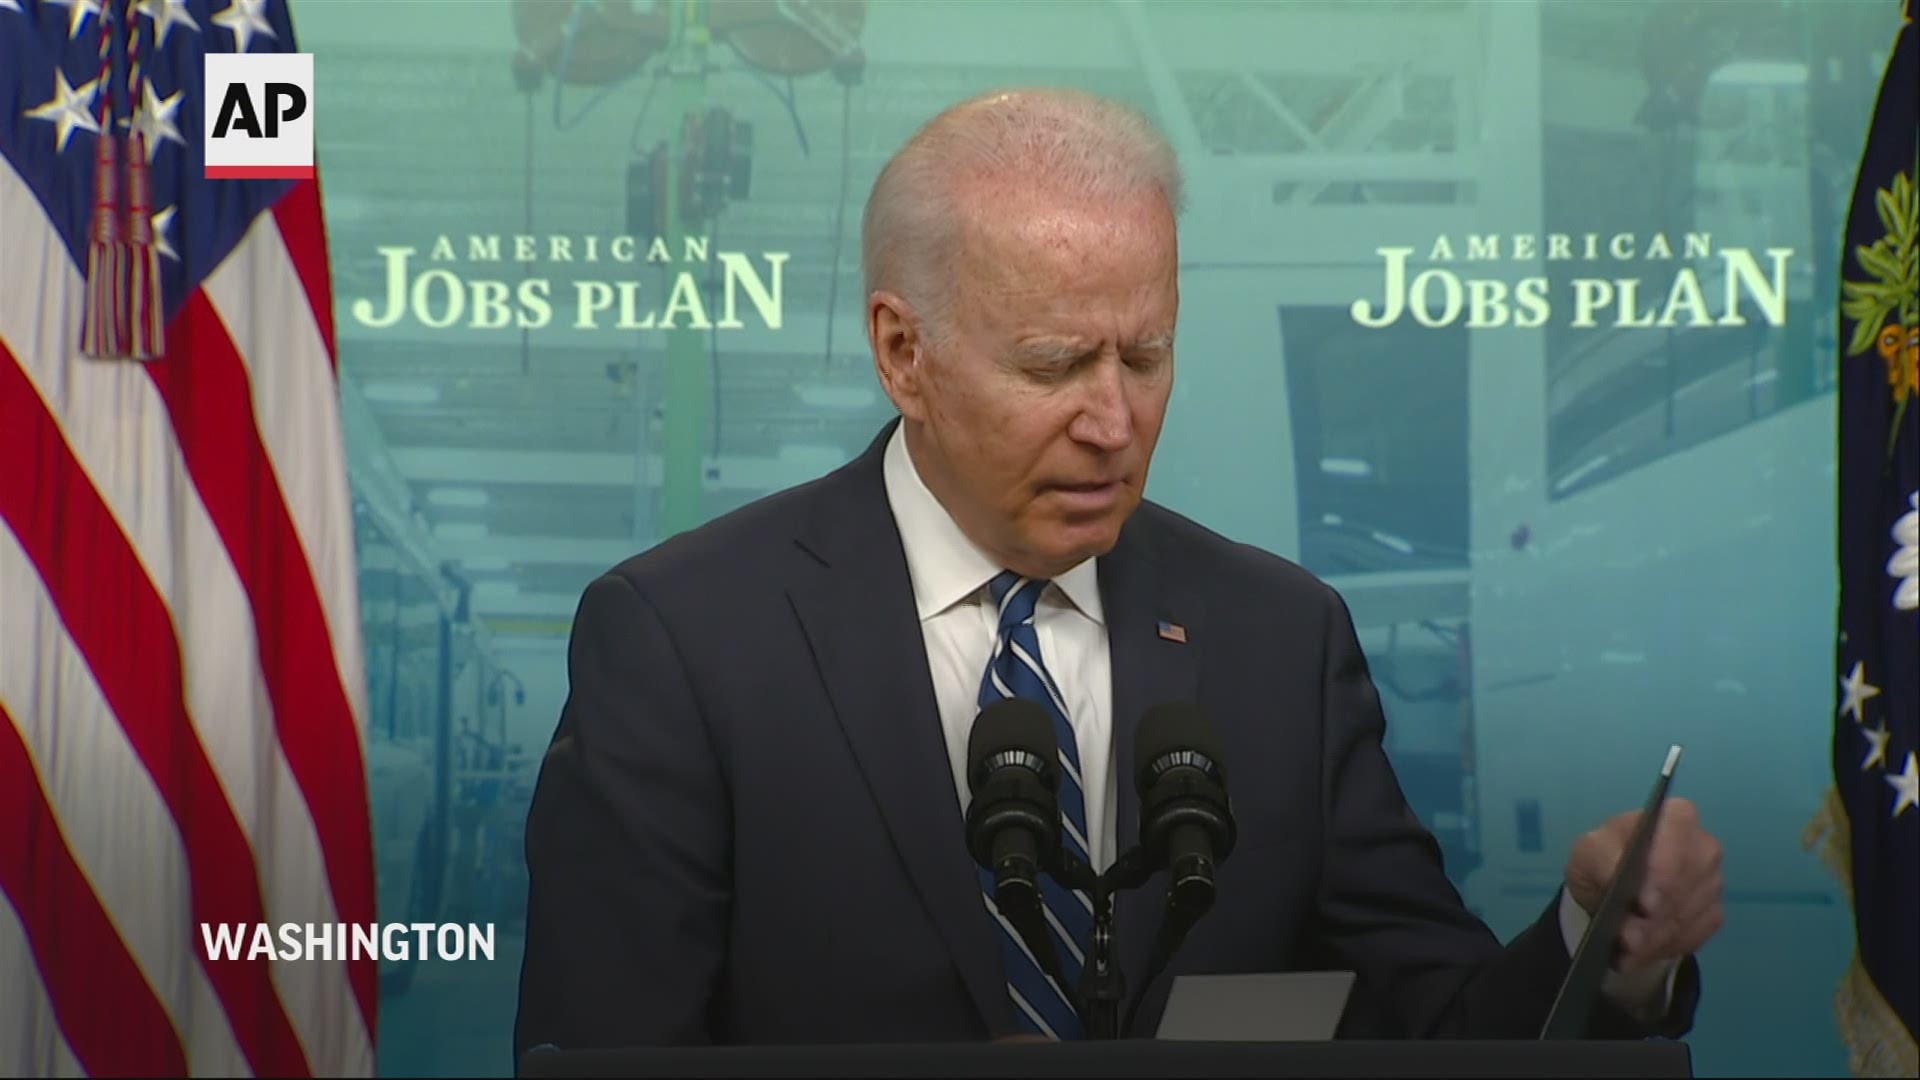 Biden says that for vaccinated Americans the holiday weekend will be worth celebrating.